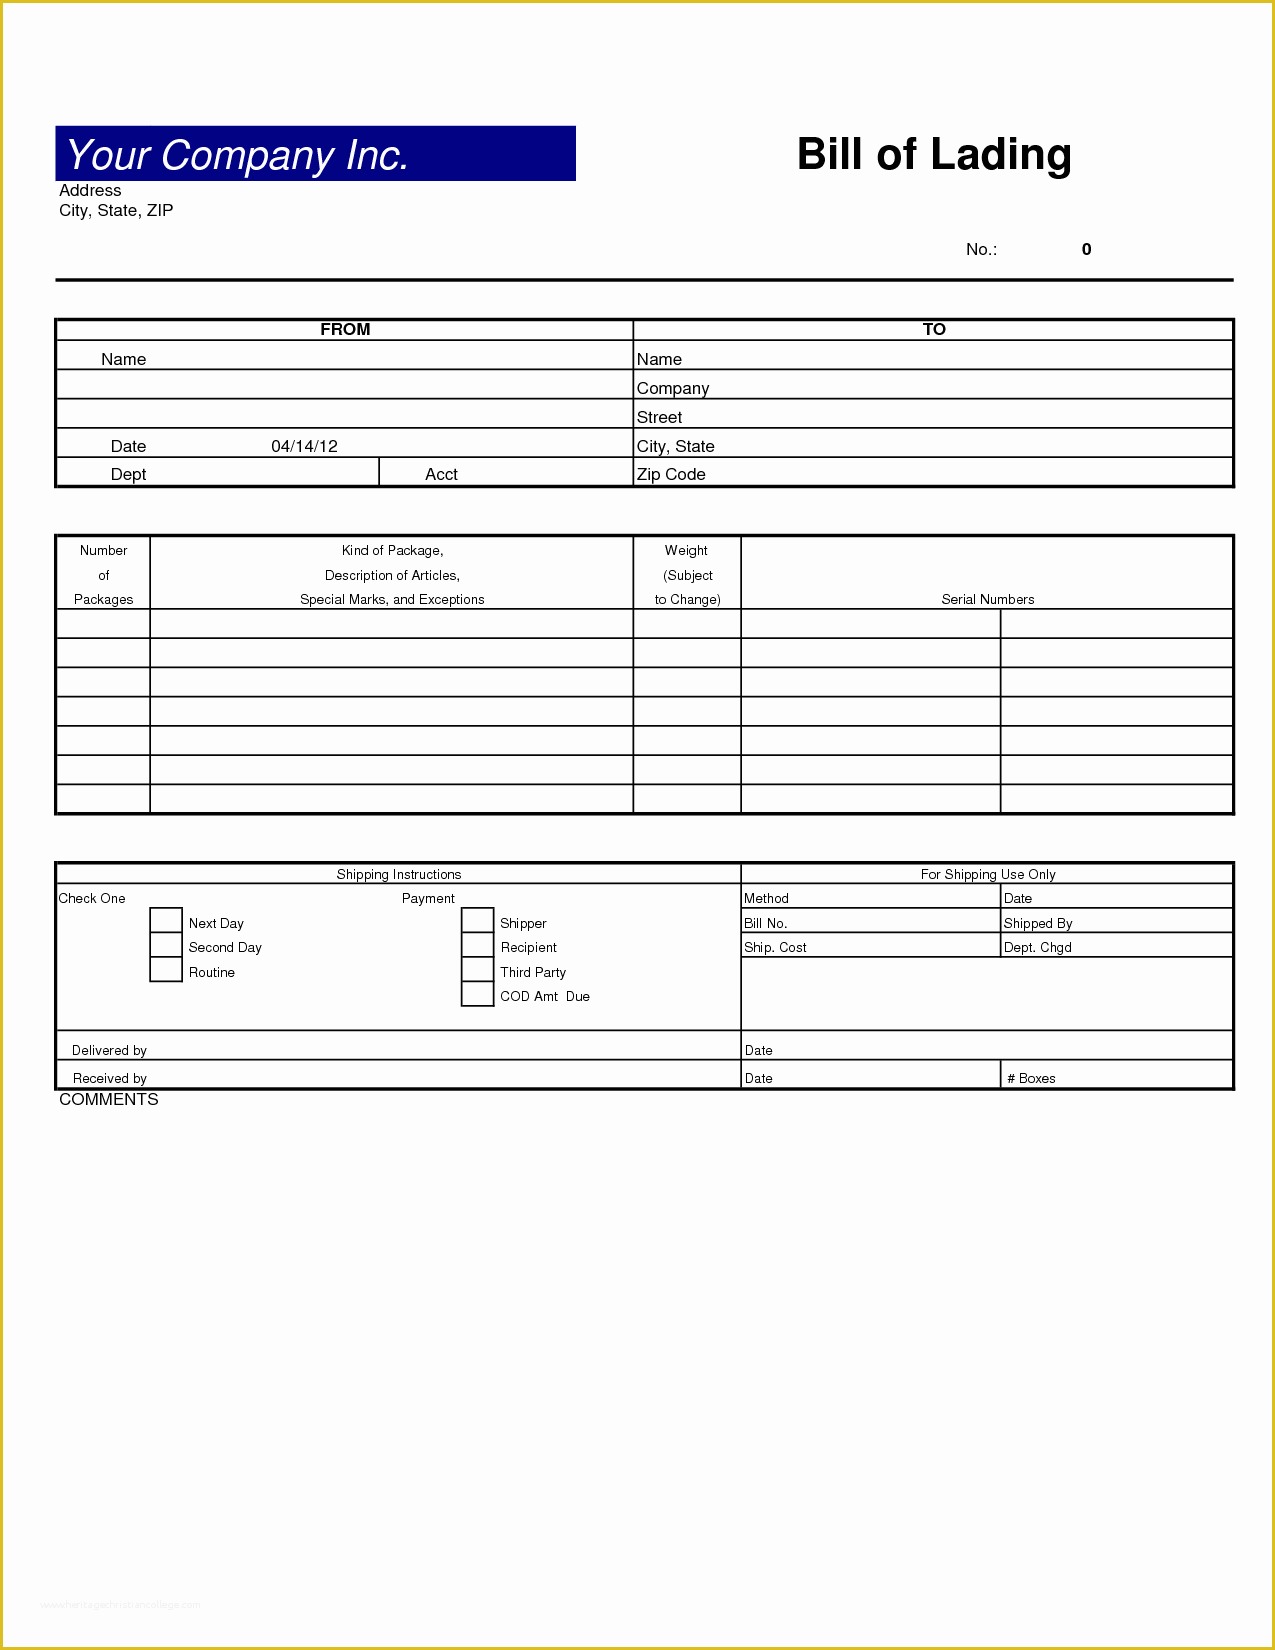 Free Bill Of Lading Template Excel Of 10 Best Of Bill Lading Excel format Blank Bill